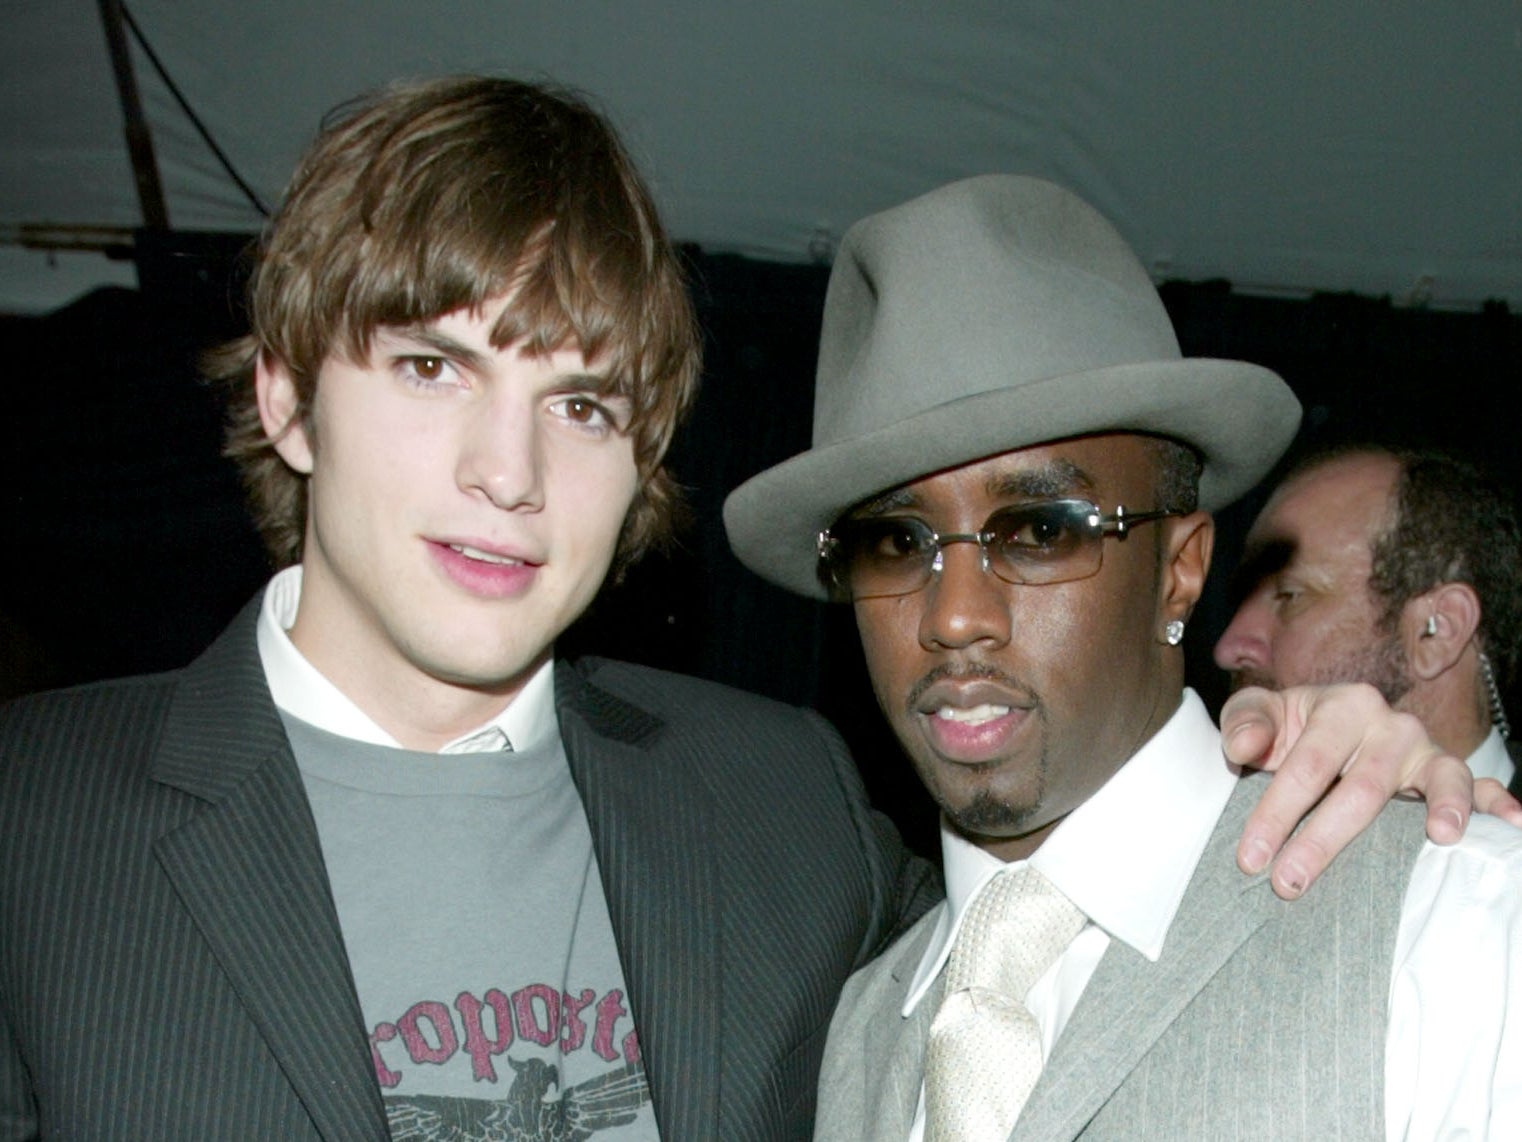 Actor Ashton Kutcher and rapper Sean “Diddy” Combs in 2003